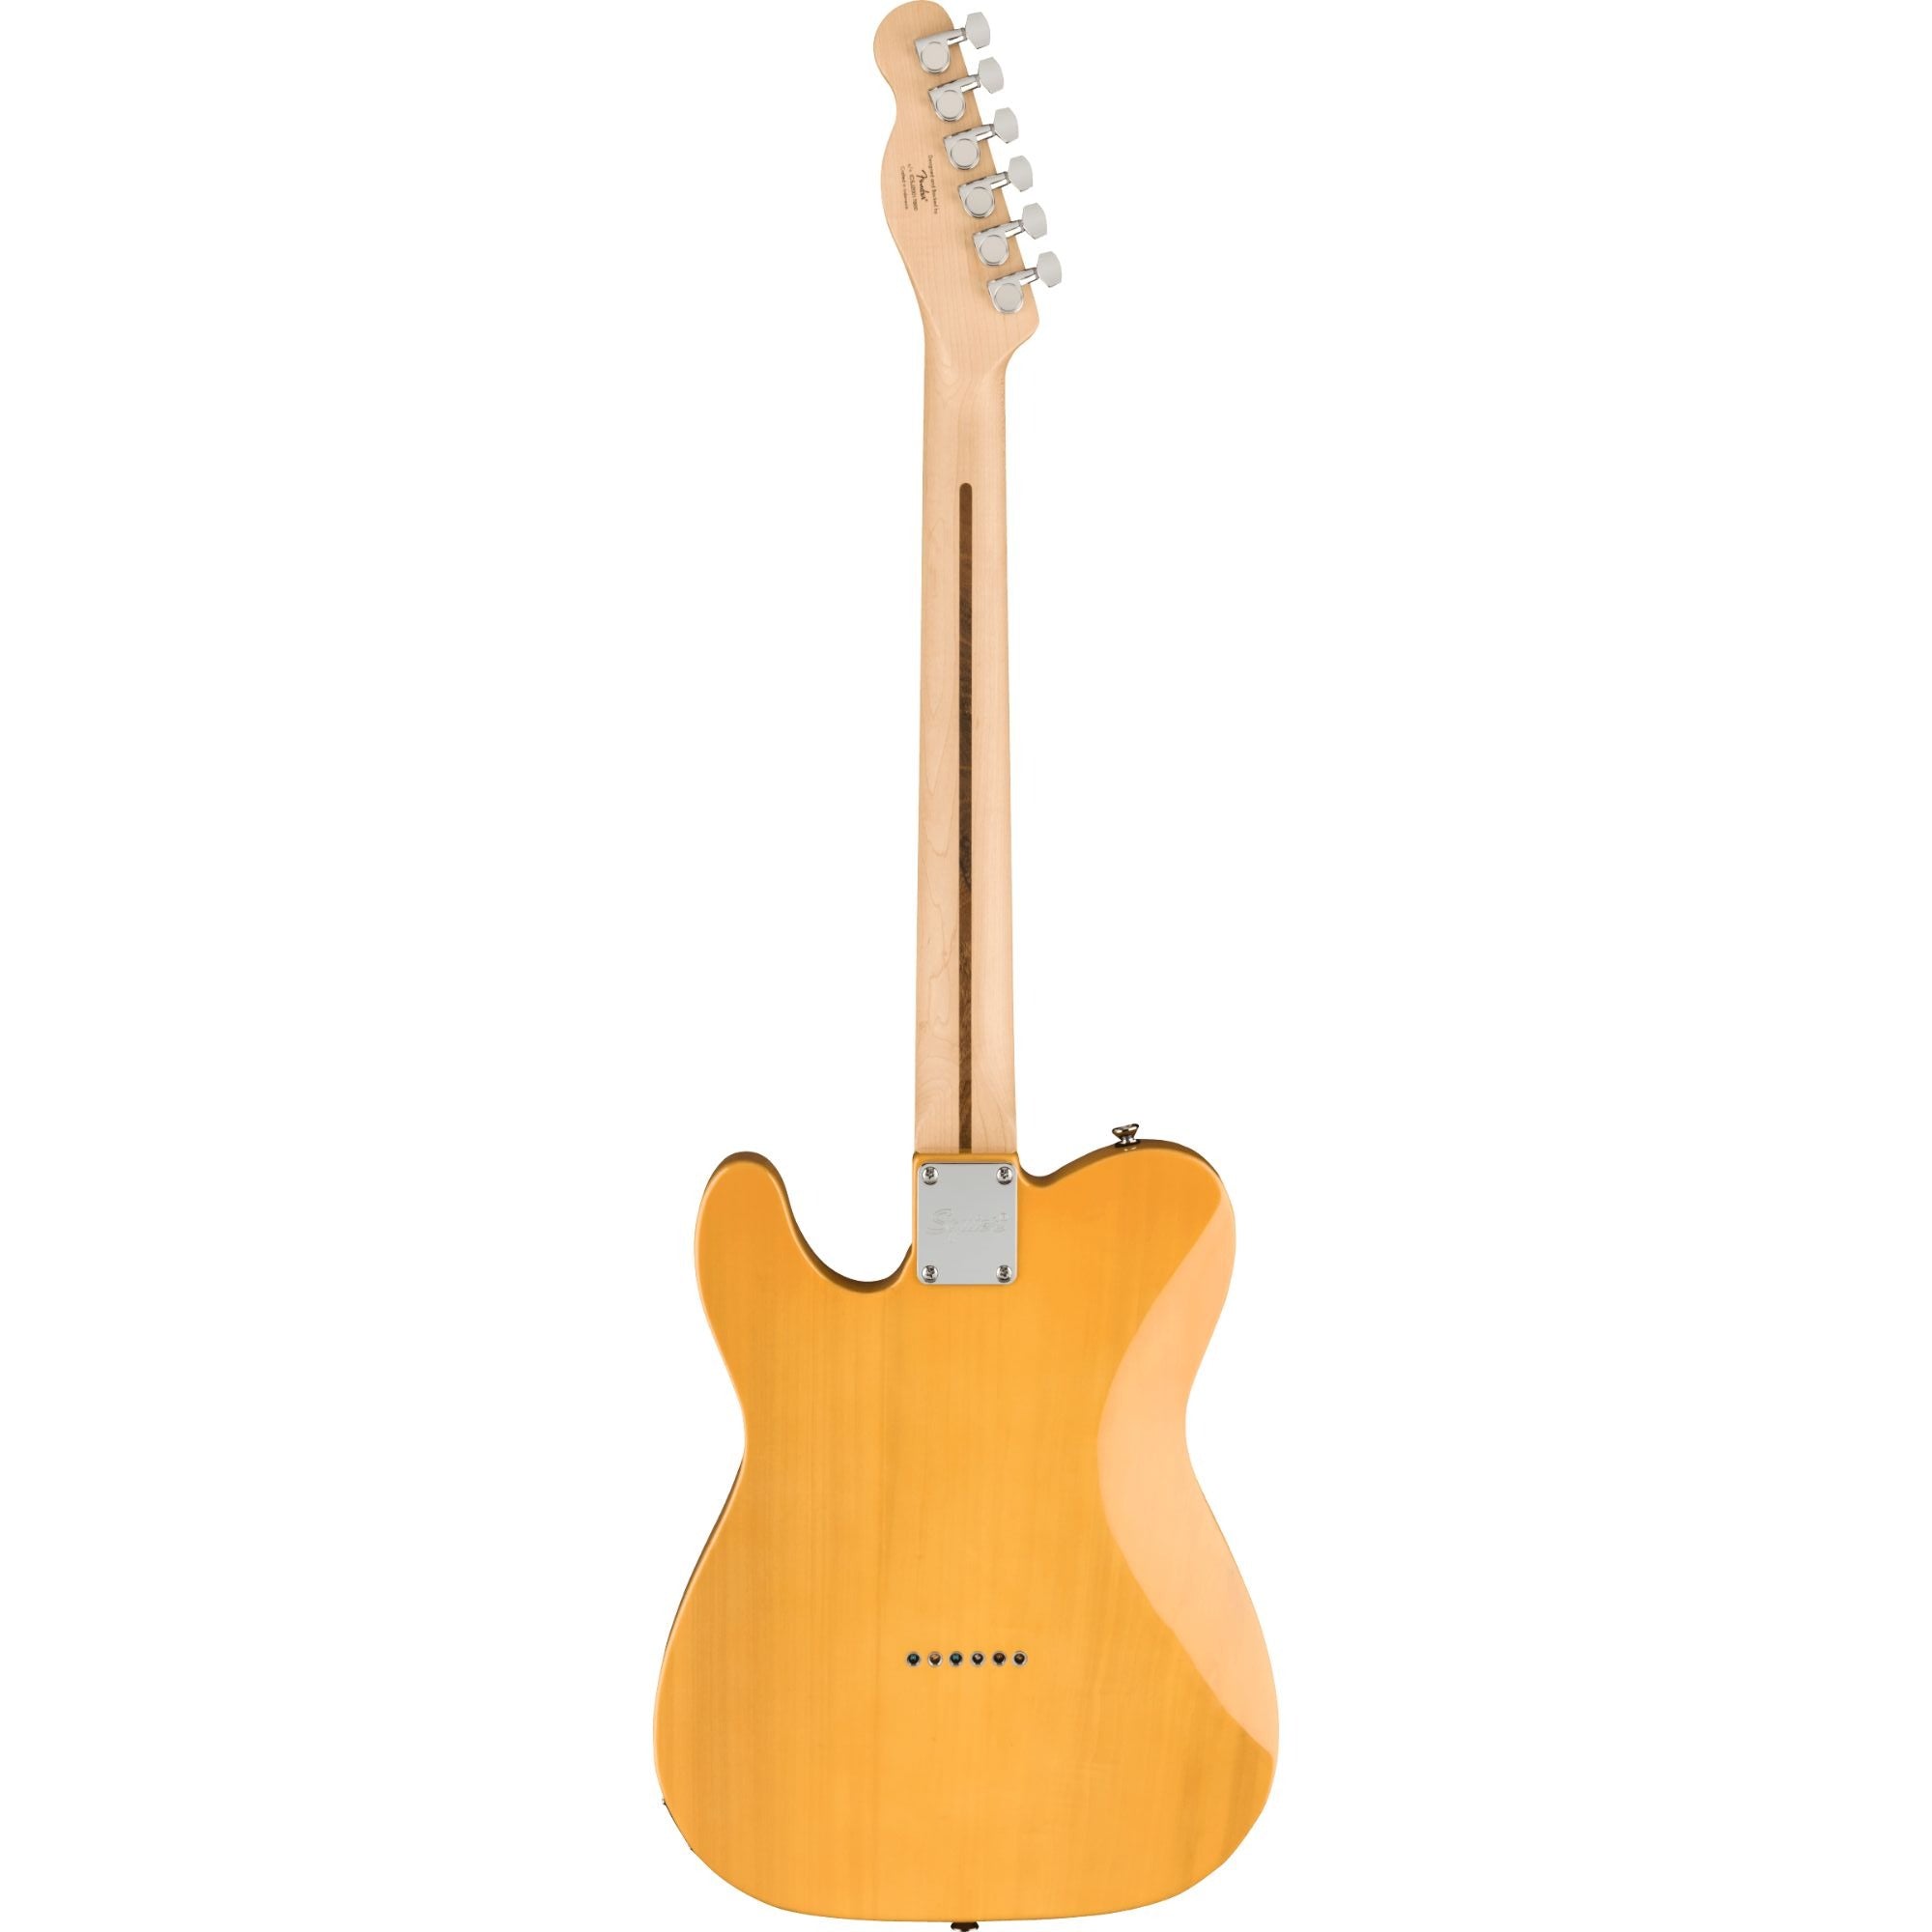 Squier Affinity Series Telecaster, Butterscotch Blonde